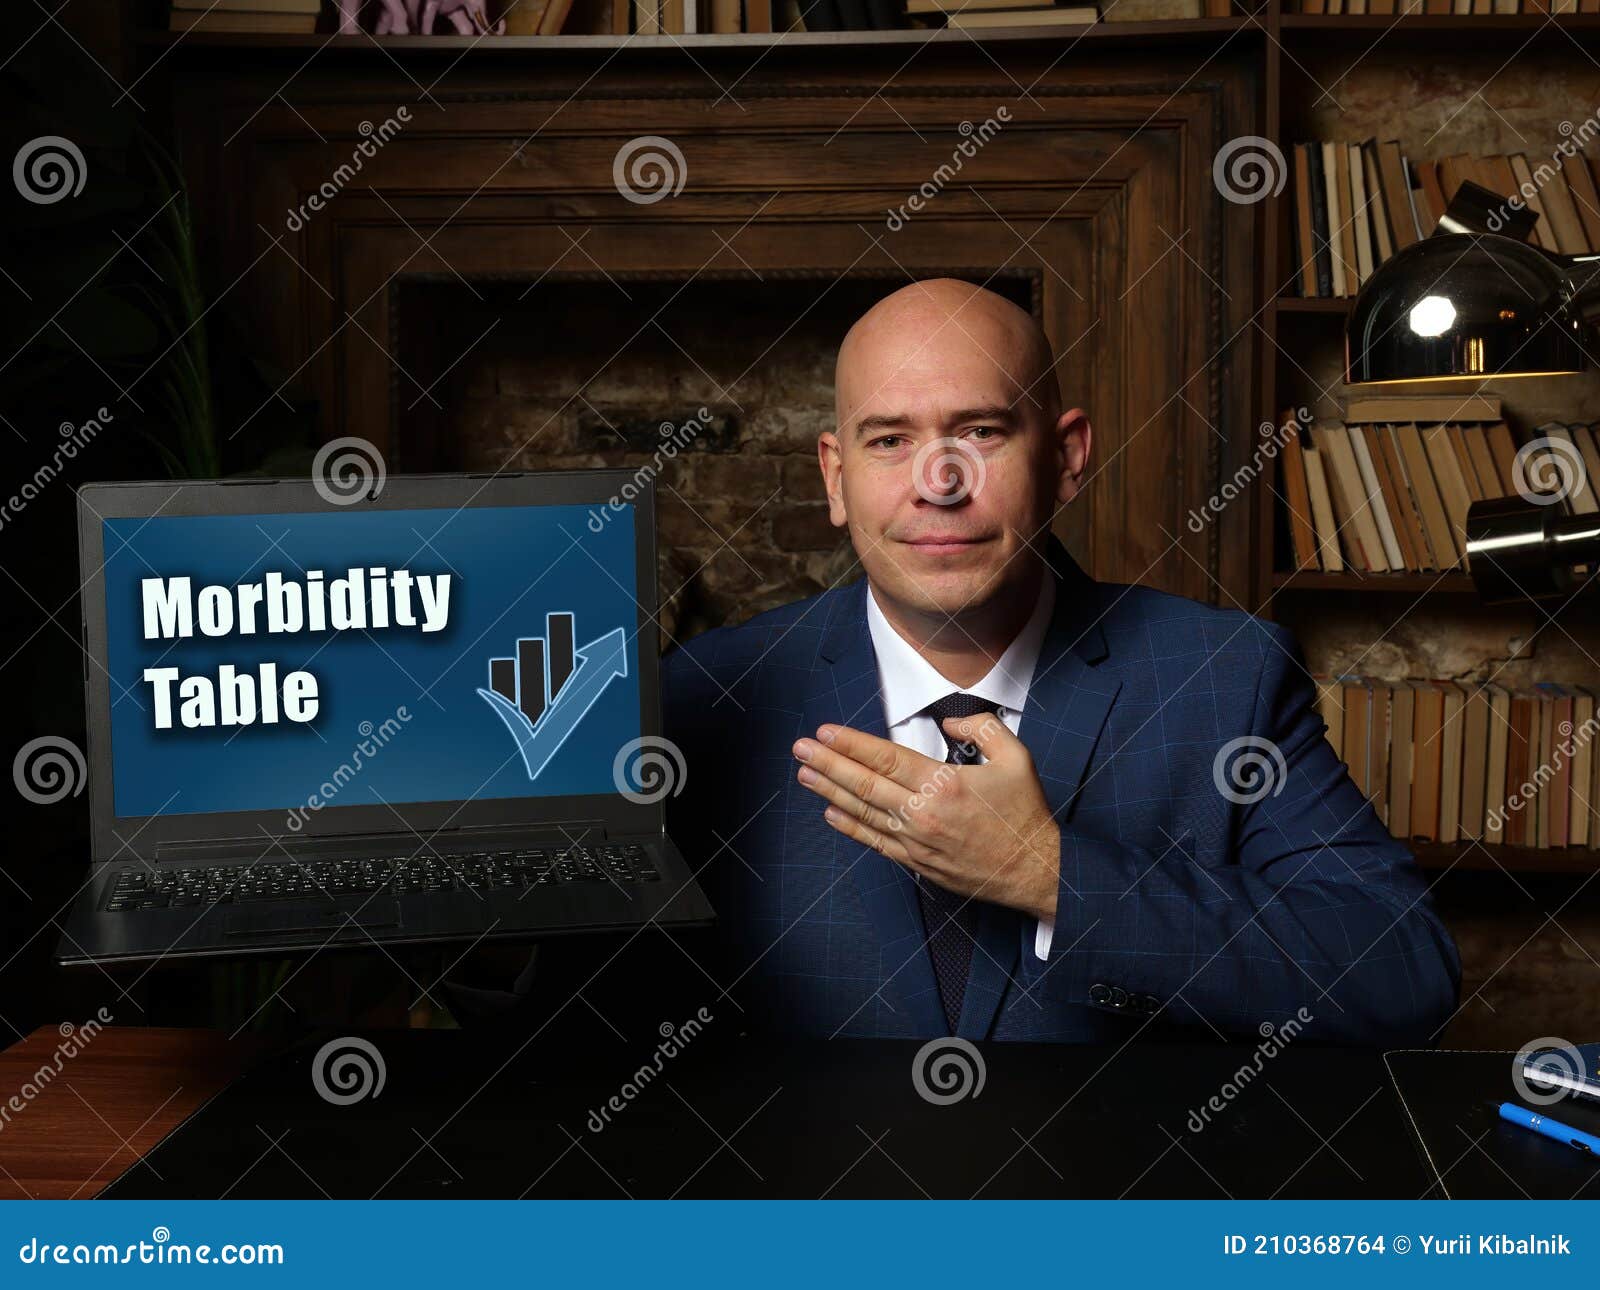 financial concept meaning morbidity table with sign on laptop